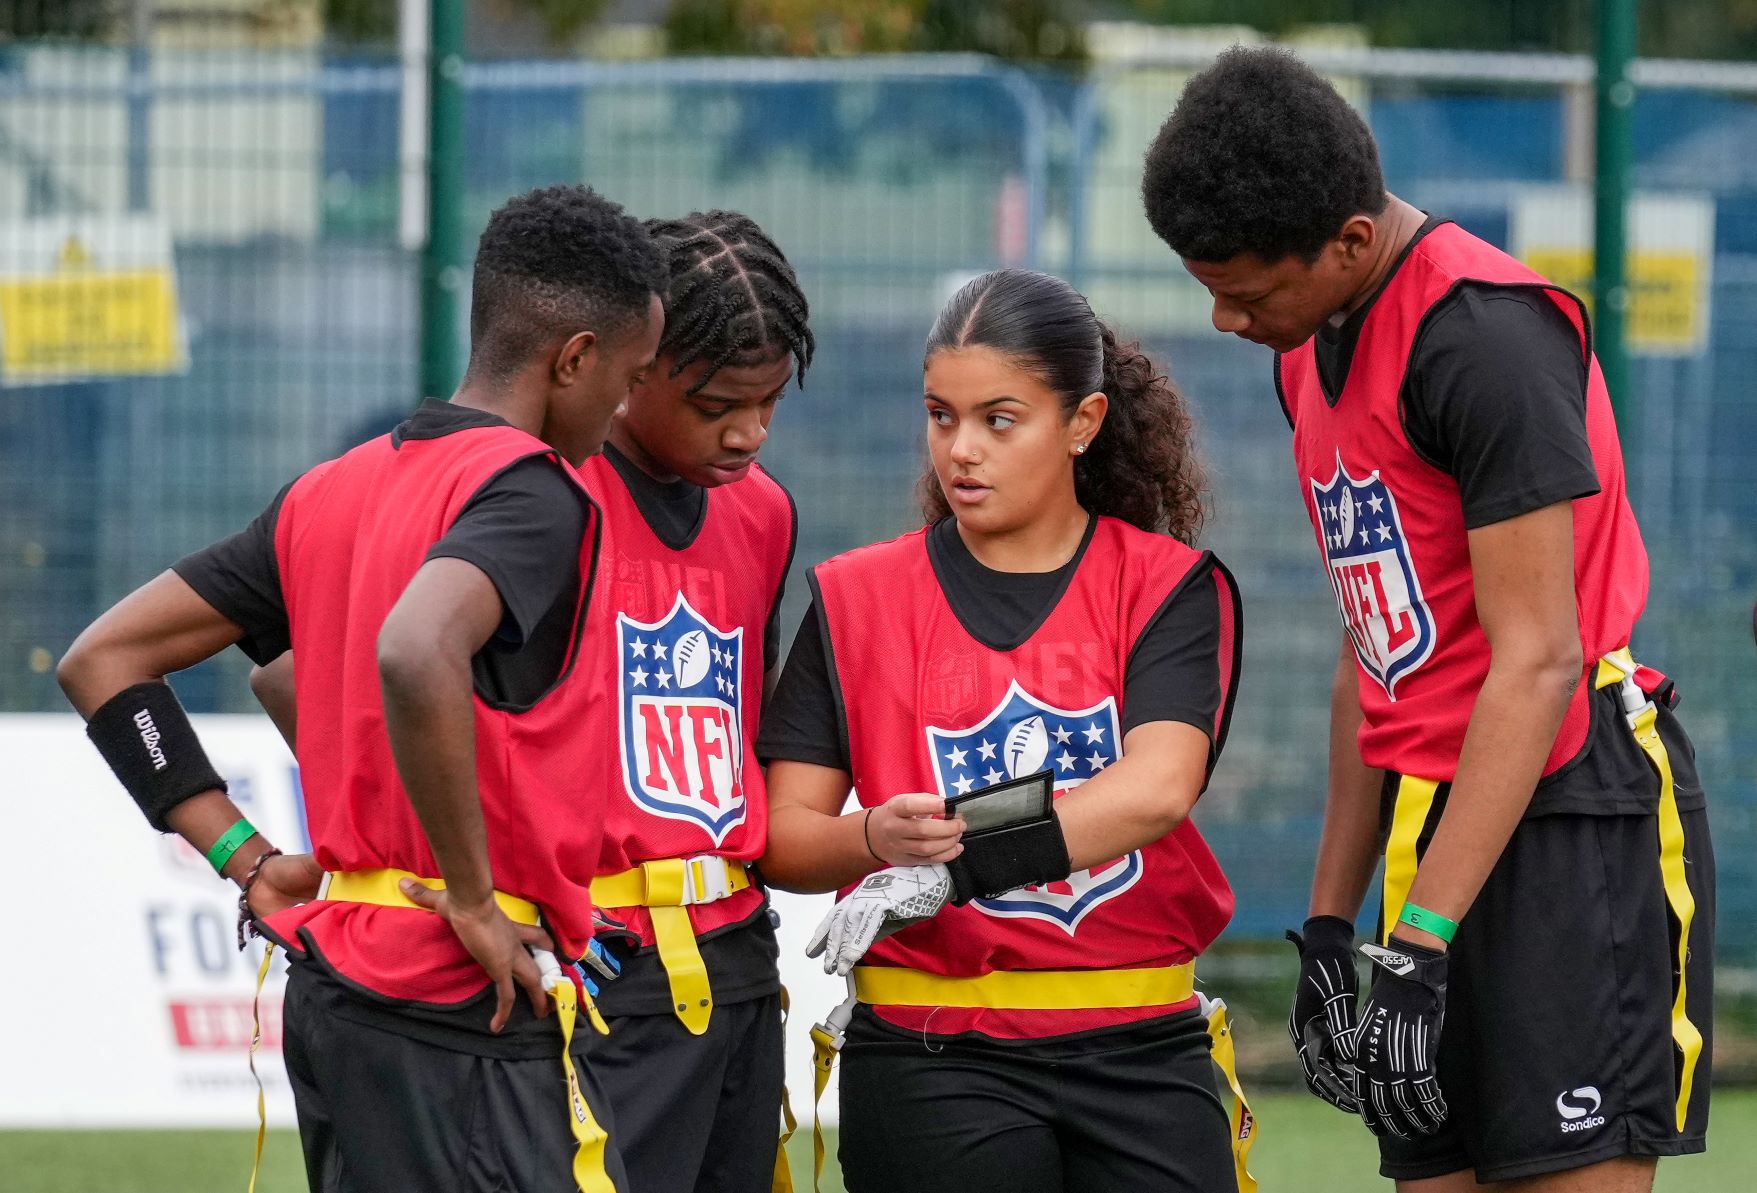 Young people wearing nfl bibs